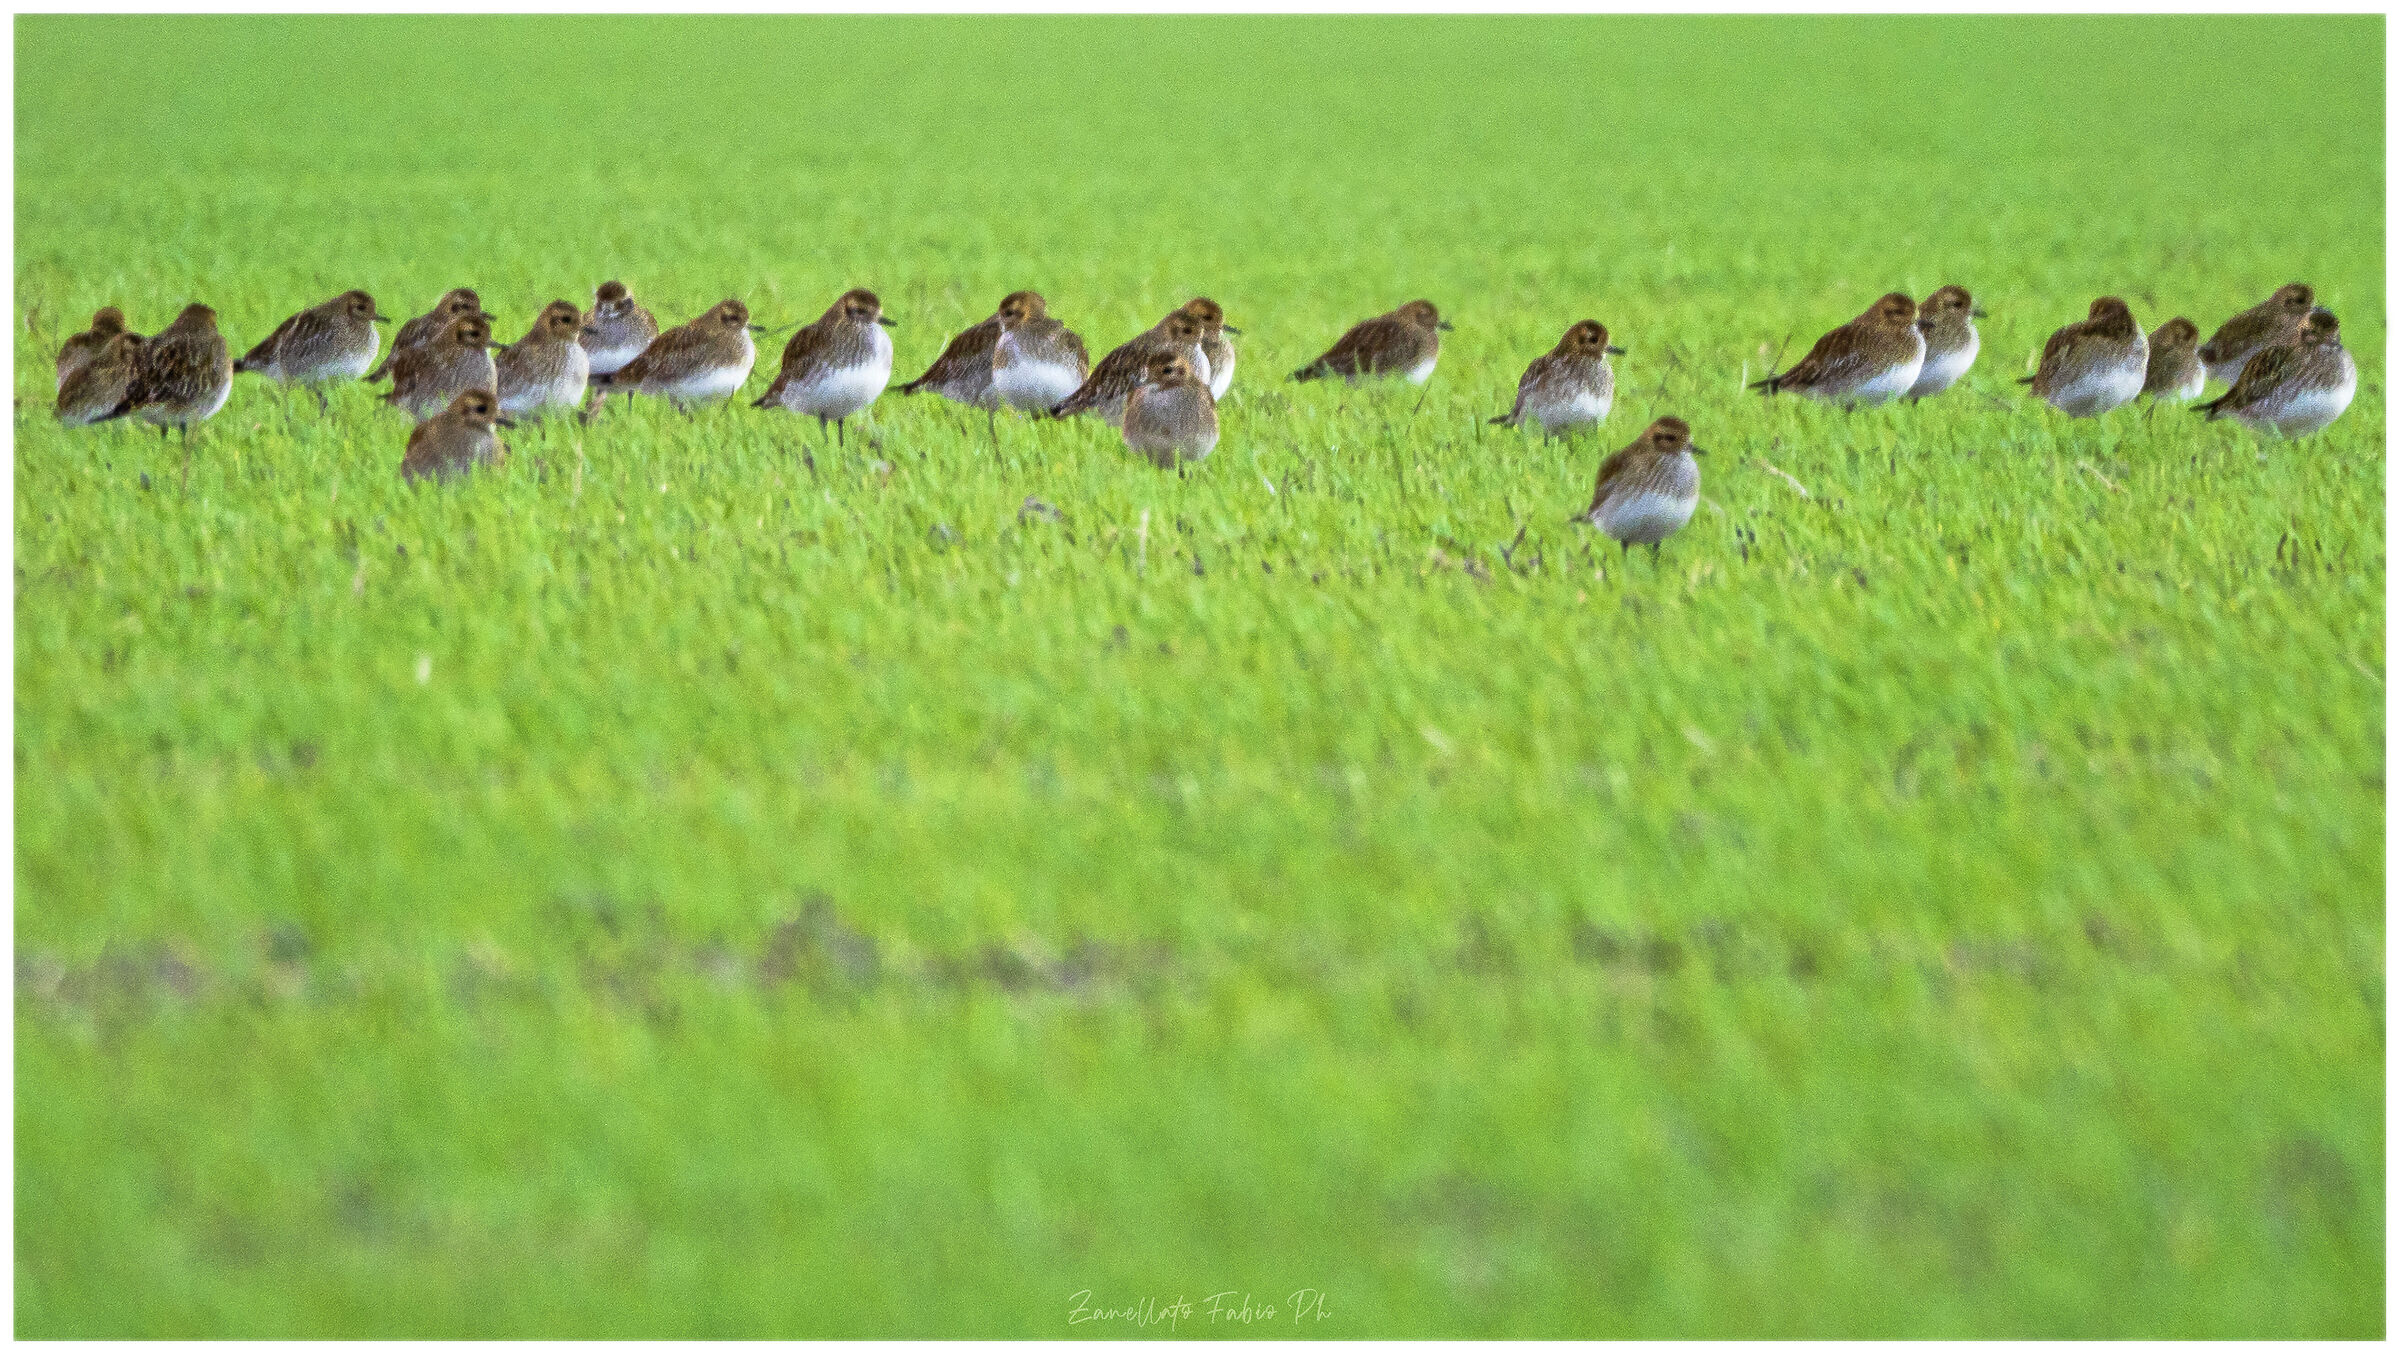 Golden plovers on lawn...